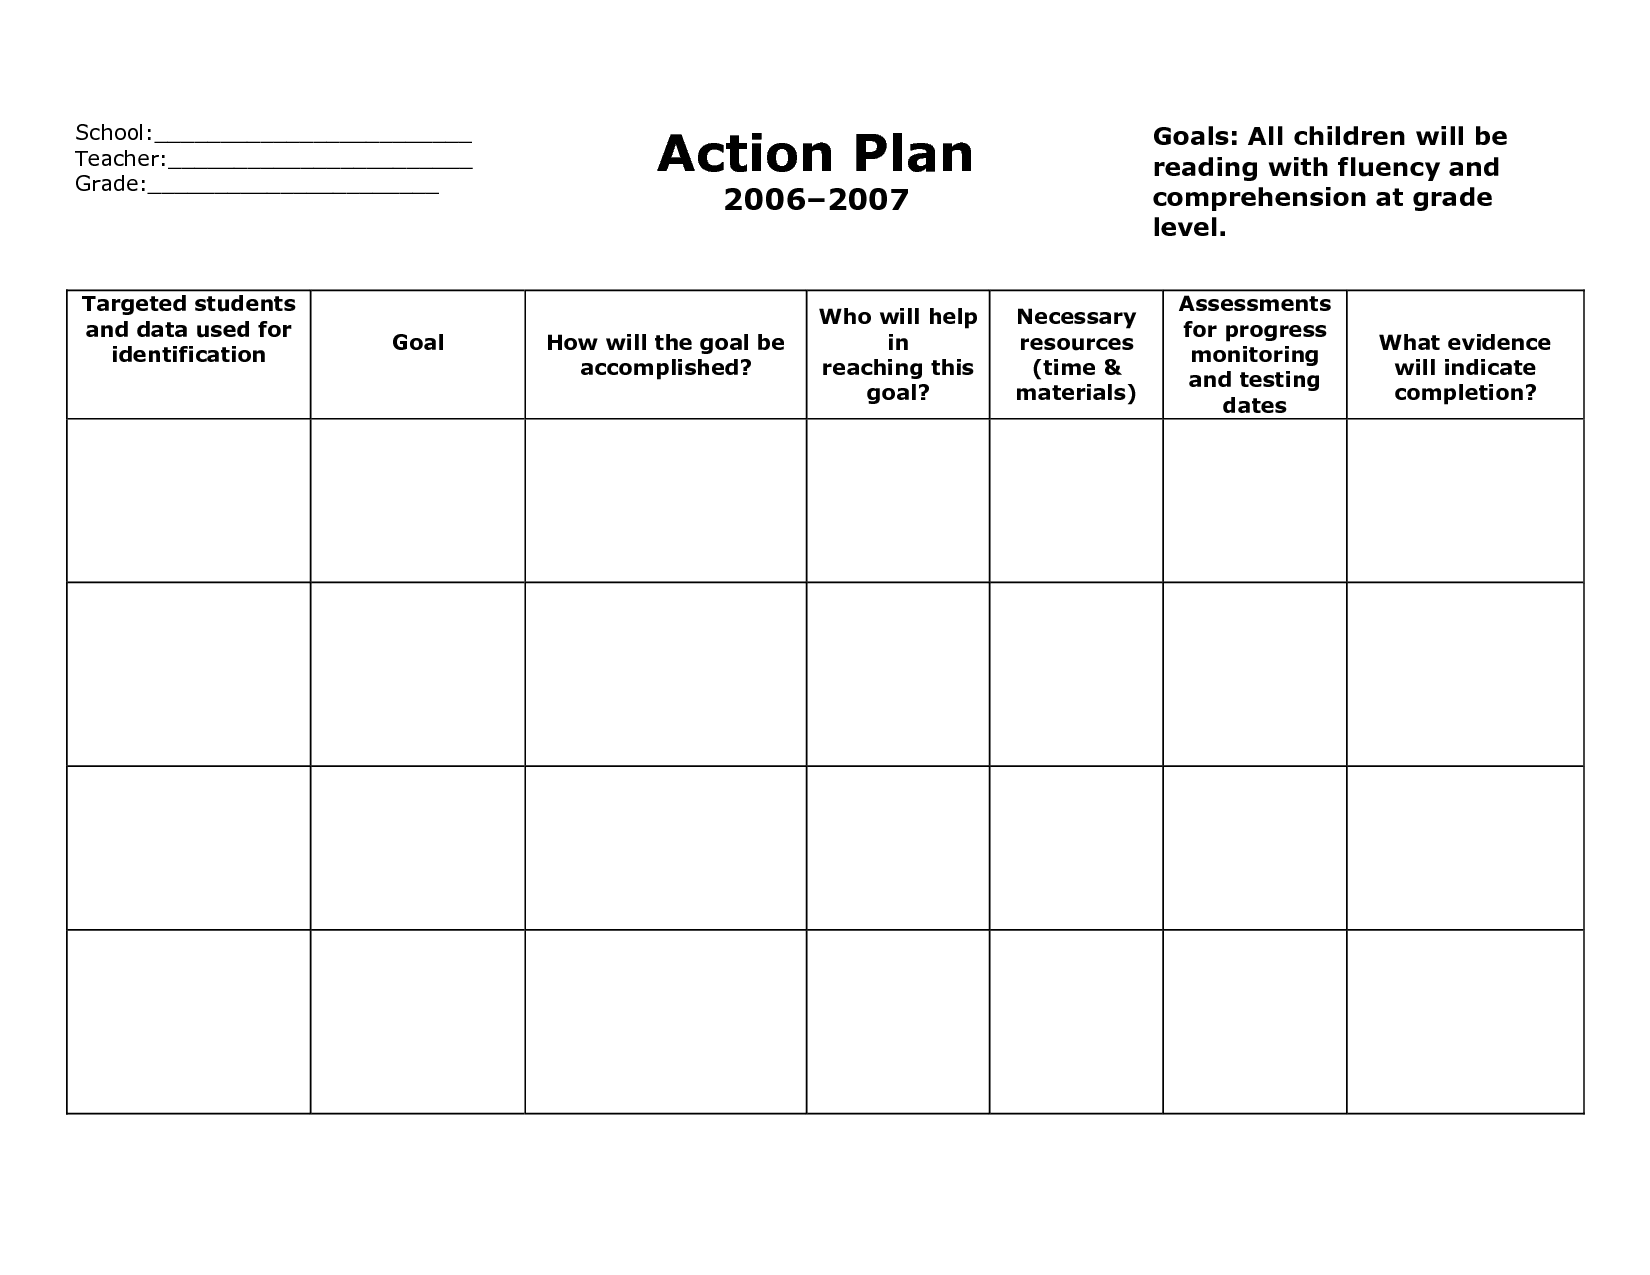 Action Plan Template Action Plan Format v5FCLyv5 | school action 